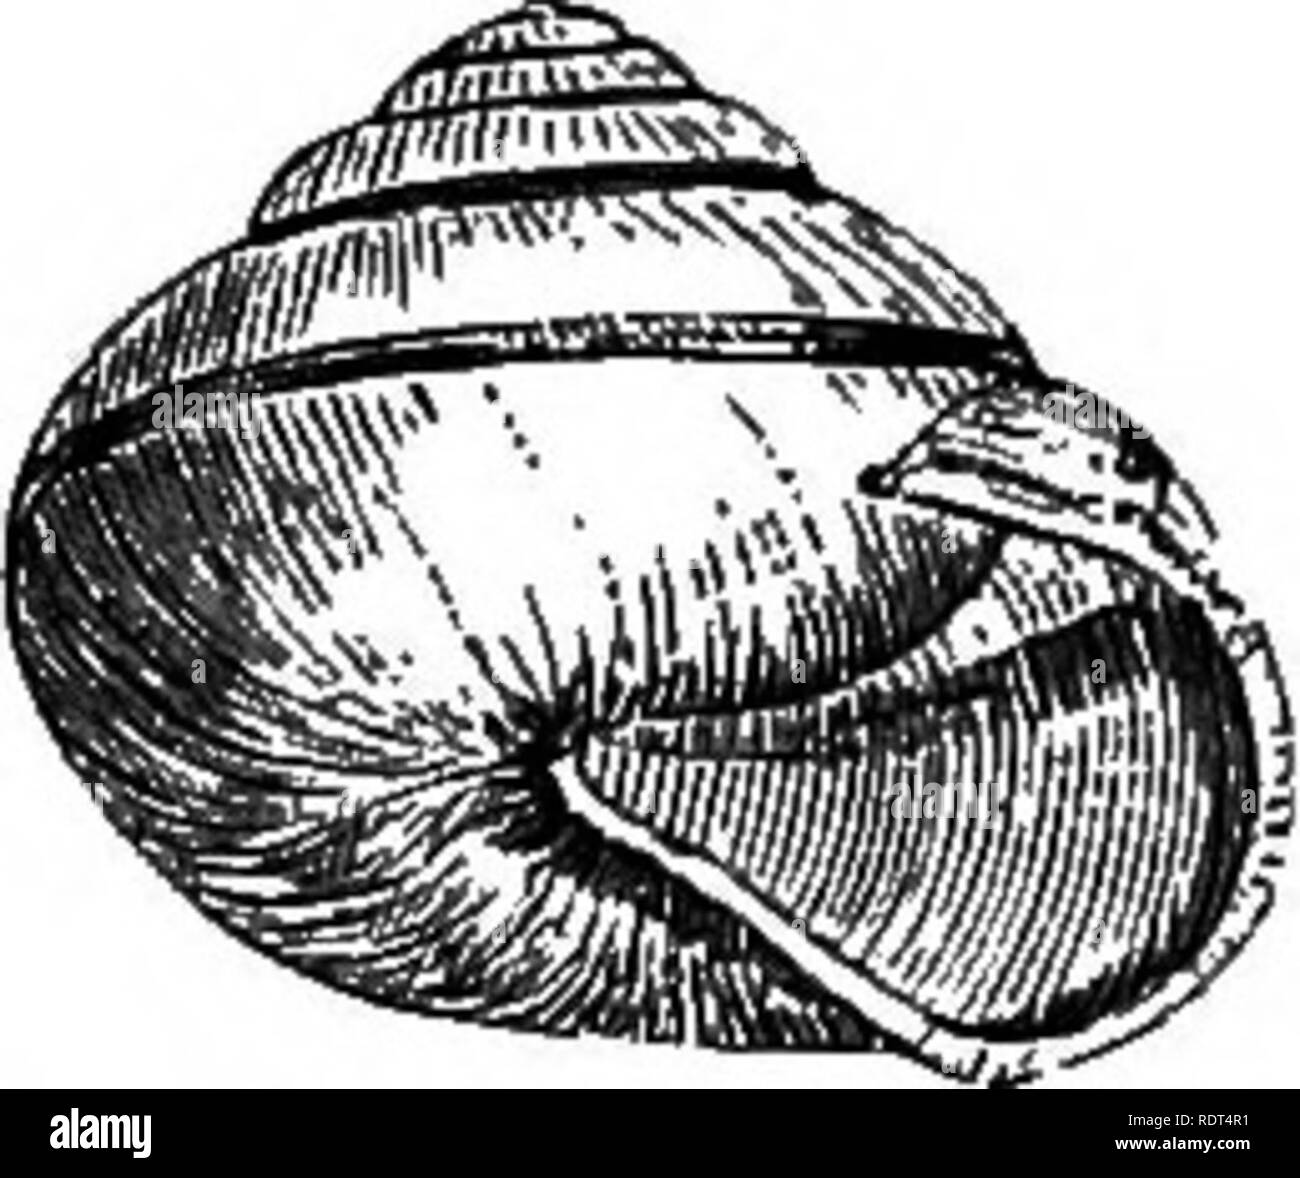 . My garden, its plan and culture together with a general description of its geology, botany, and natural history. Gardening. Fig. 1087.—Helix Pomatia.. Fig. 108S.—Girdled Shell. Fig. 1089.—Zonites crystallinus. Fig. 1090.—Succinea putris. Fig. logr.—Limnaeus Pereger. there were several species, but Dr. Gray, the great authority, assured me they were all the same: one naturalist has given seventy-seven names to varieties of this species alone. Of other Helicina, we have Zonites lucidus, a small species, and Zonites crystallinus (fig. 1089), which lives amongst moss and leaves. We have also Hel Stock Photo